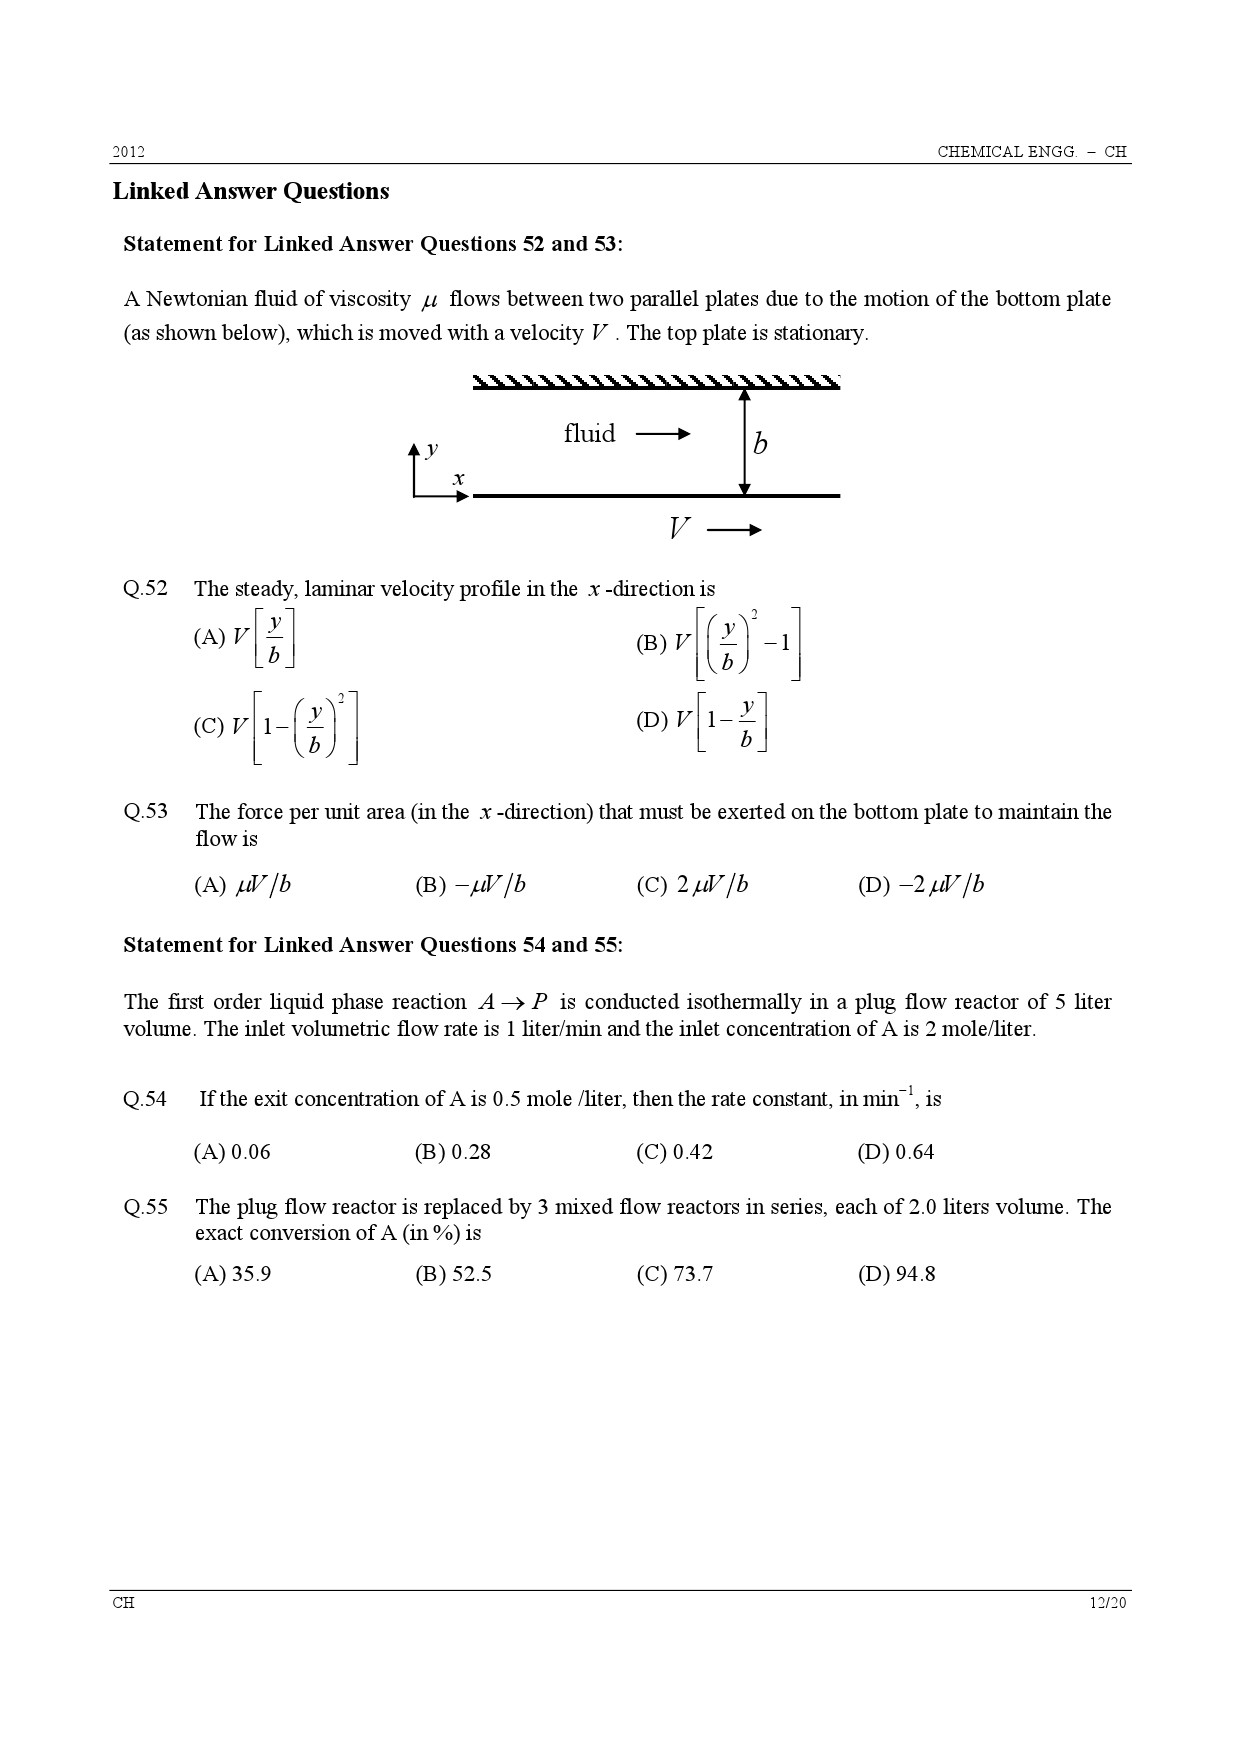 GATE Exam Question Paper 2012 Chemical Engineering 12